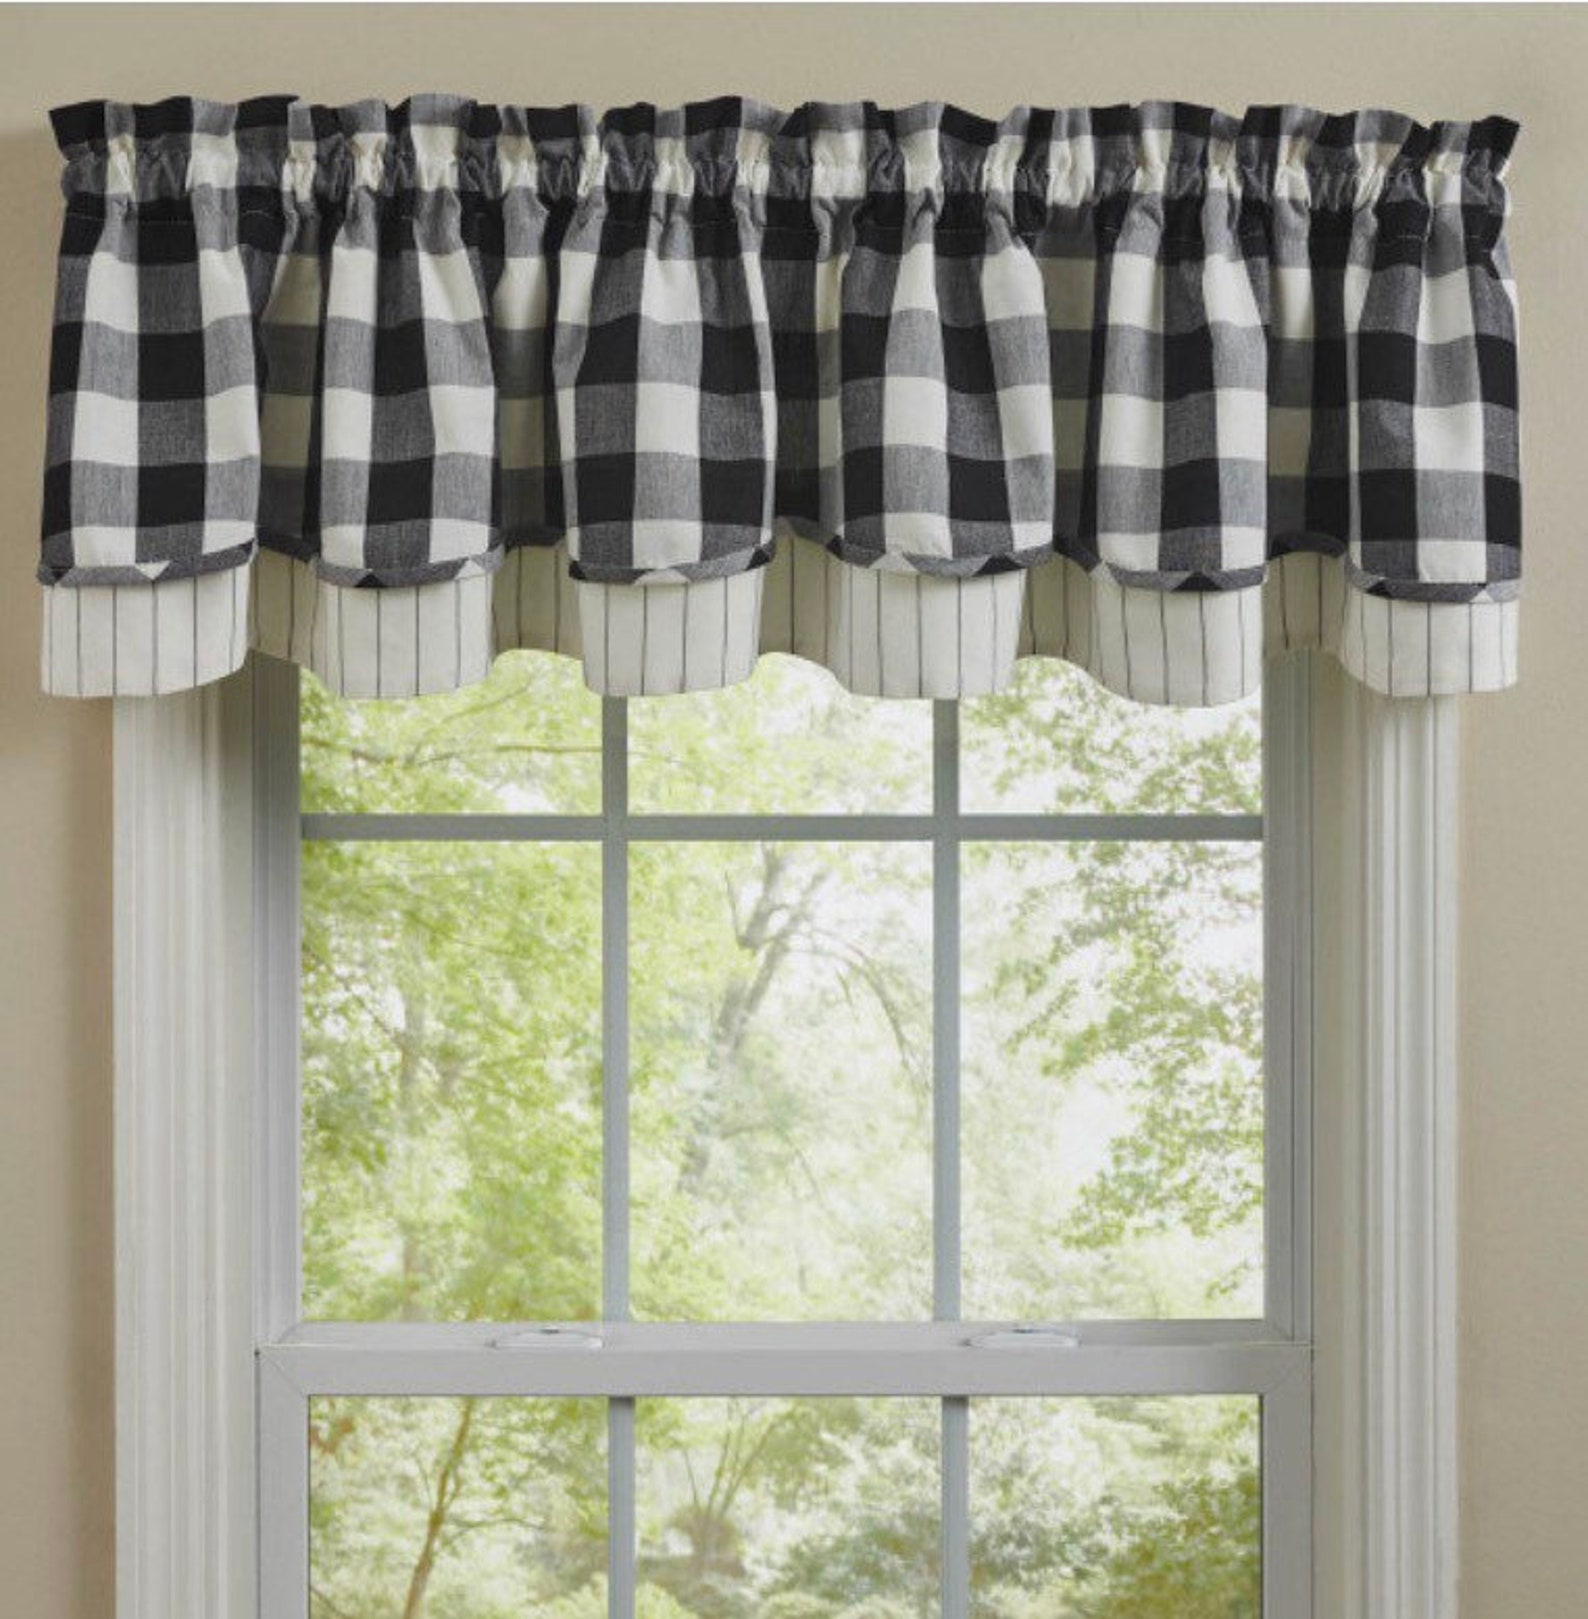 Wicklow Check Lined Layered Valance 72 X 16 New - Etsy